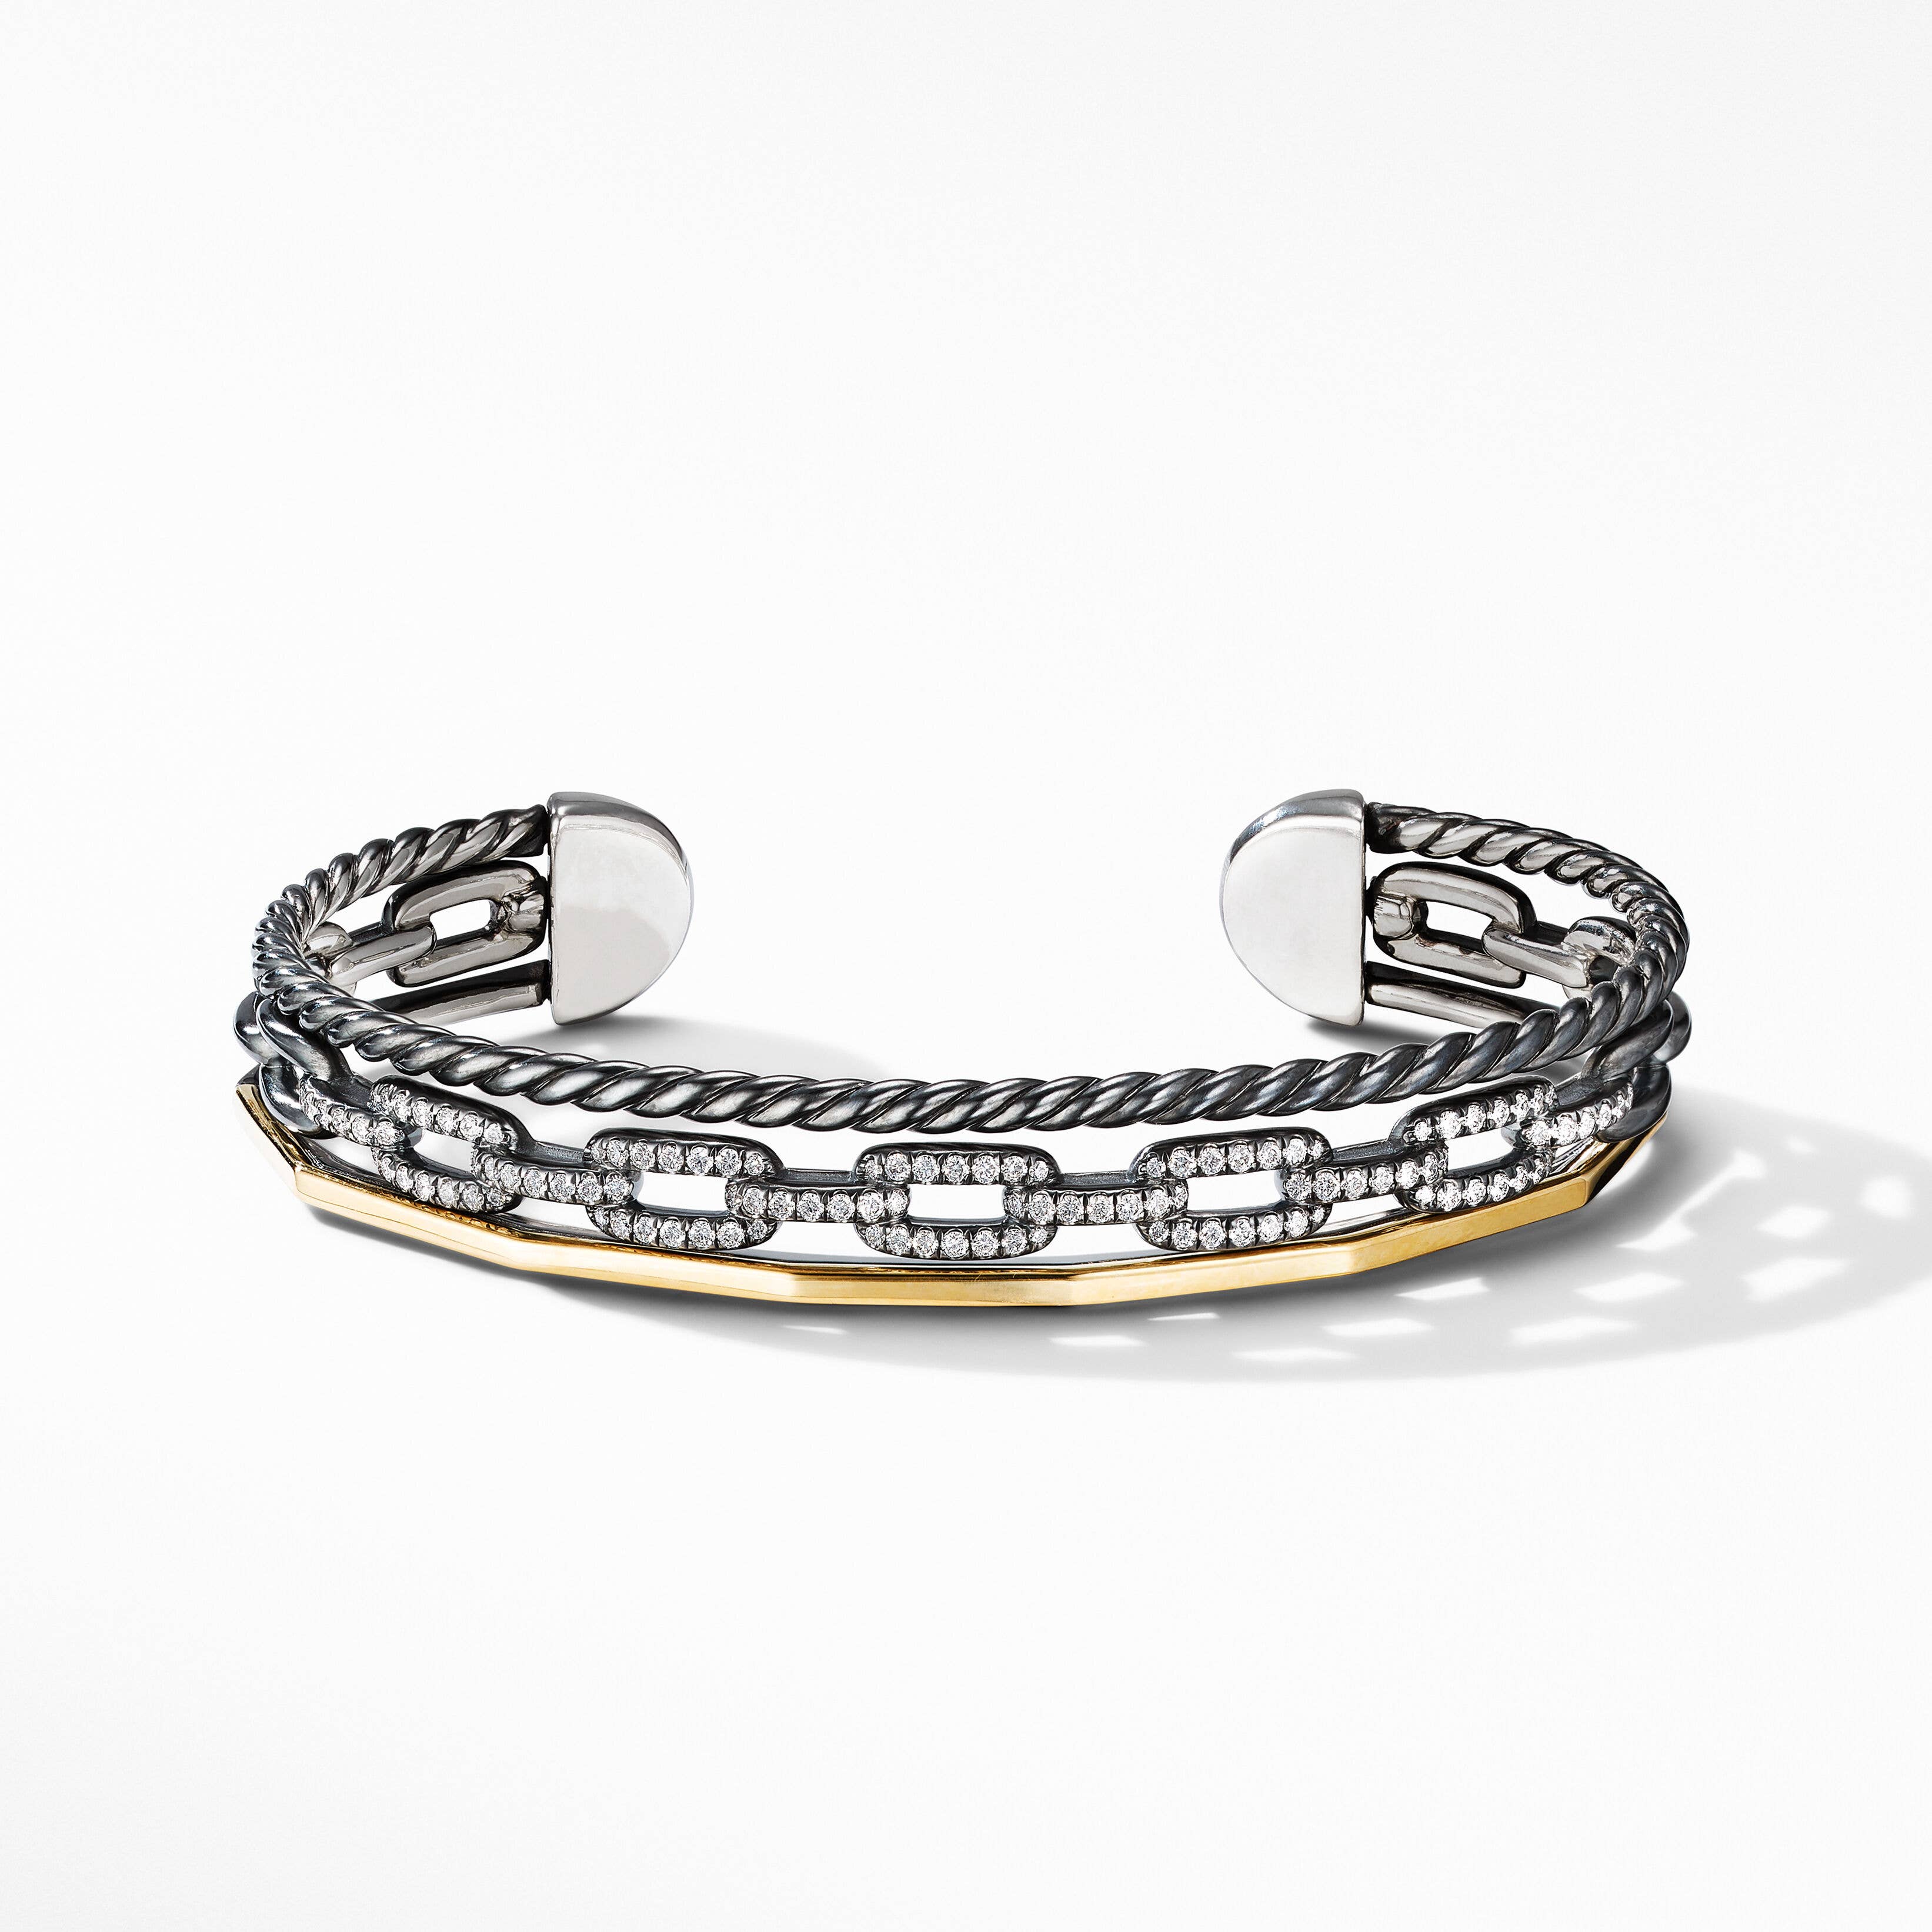 Stax Three Row Cuff Bracelet in Blackened Silver with 18K Yellow Gold and Diamonds, 9.4mm